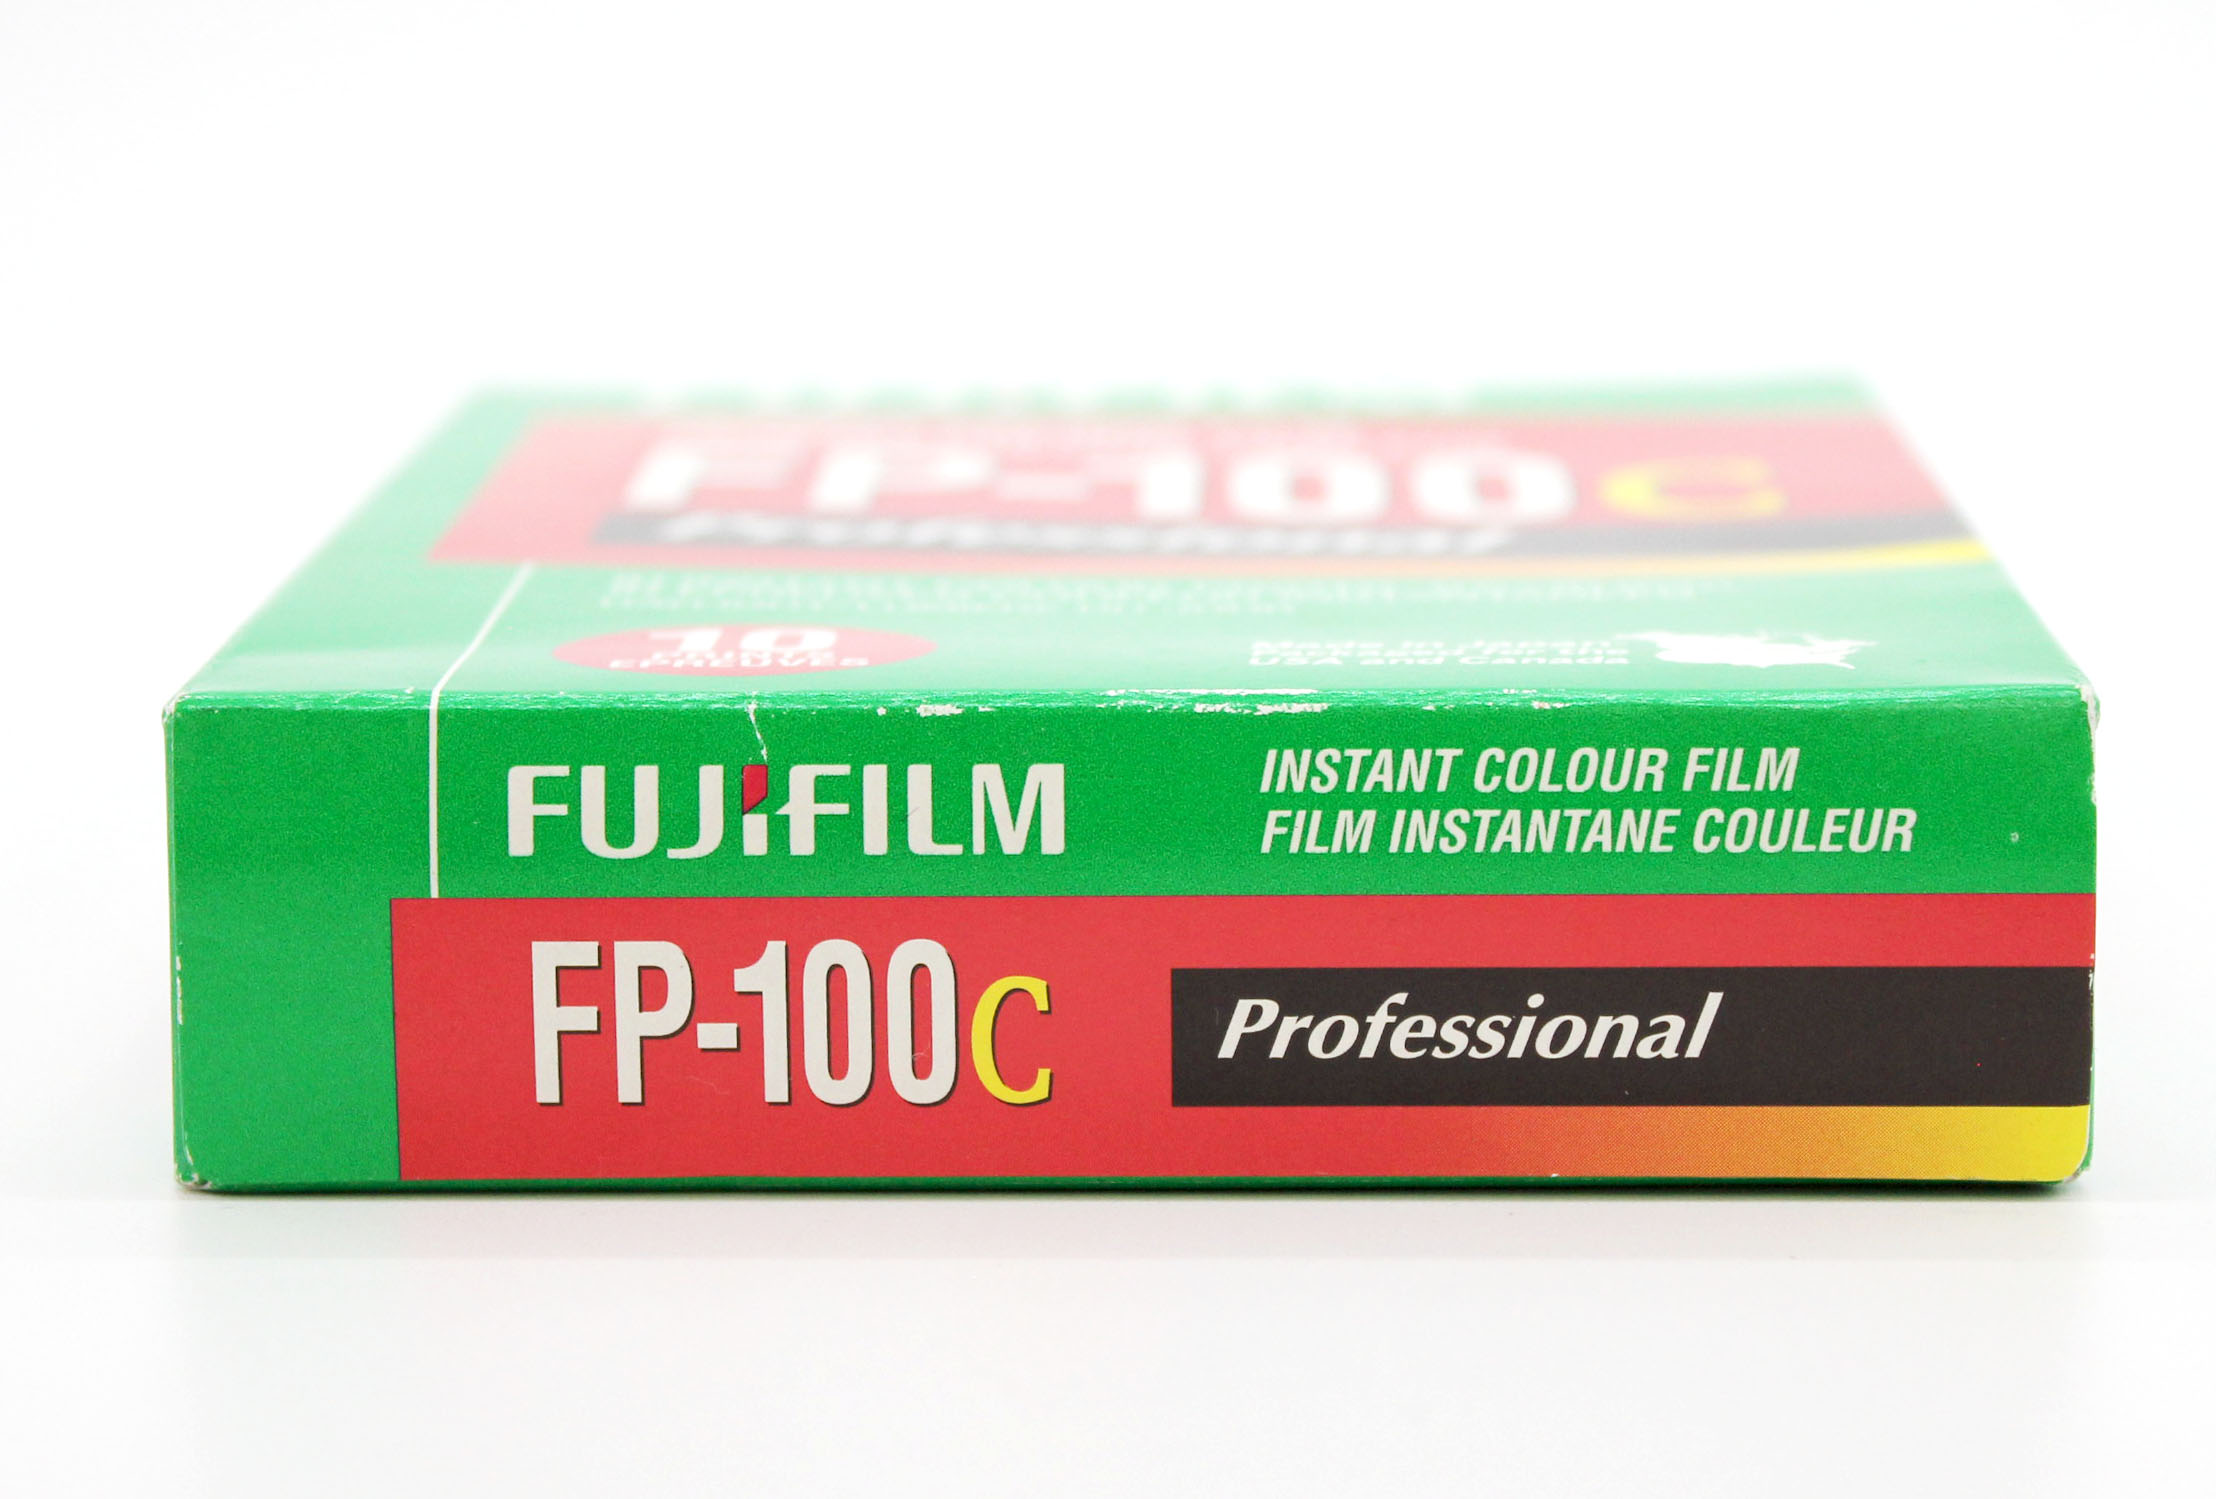  Fujifilm FP-100C Professional Instant Color Film (Exp 2014) from Japan Photo 5